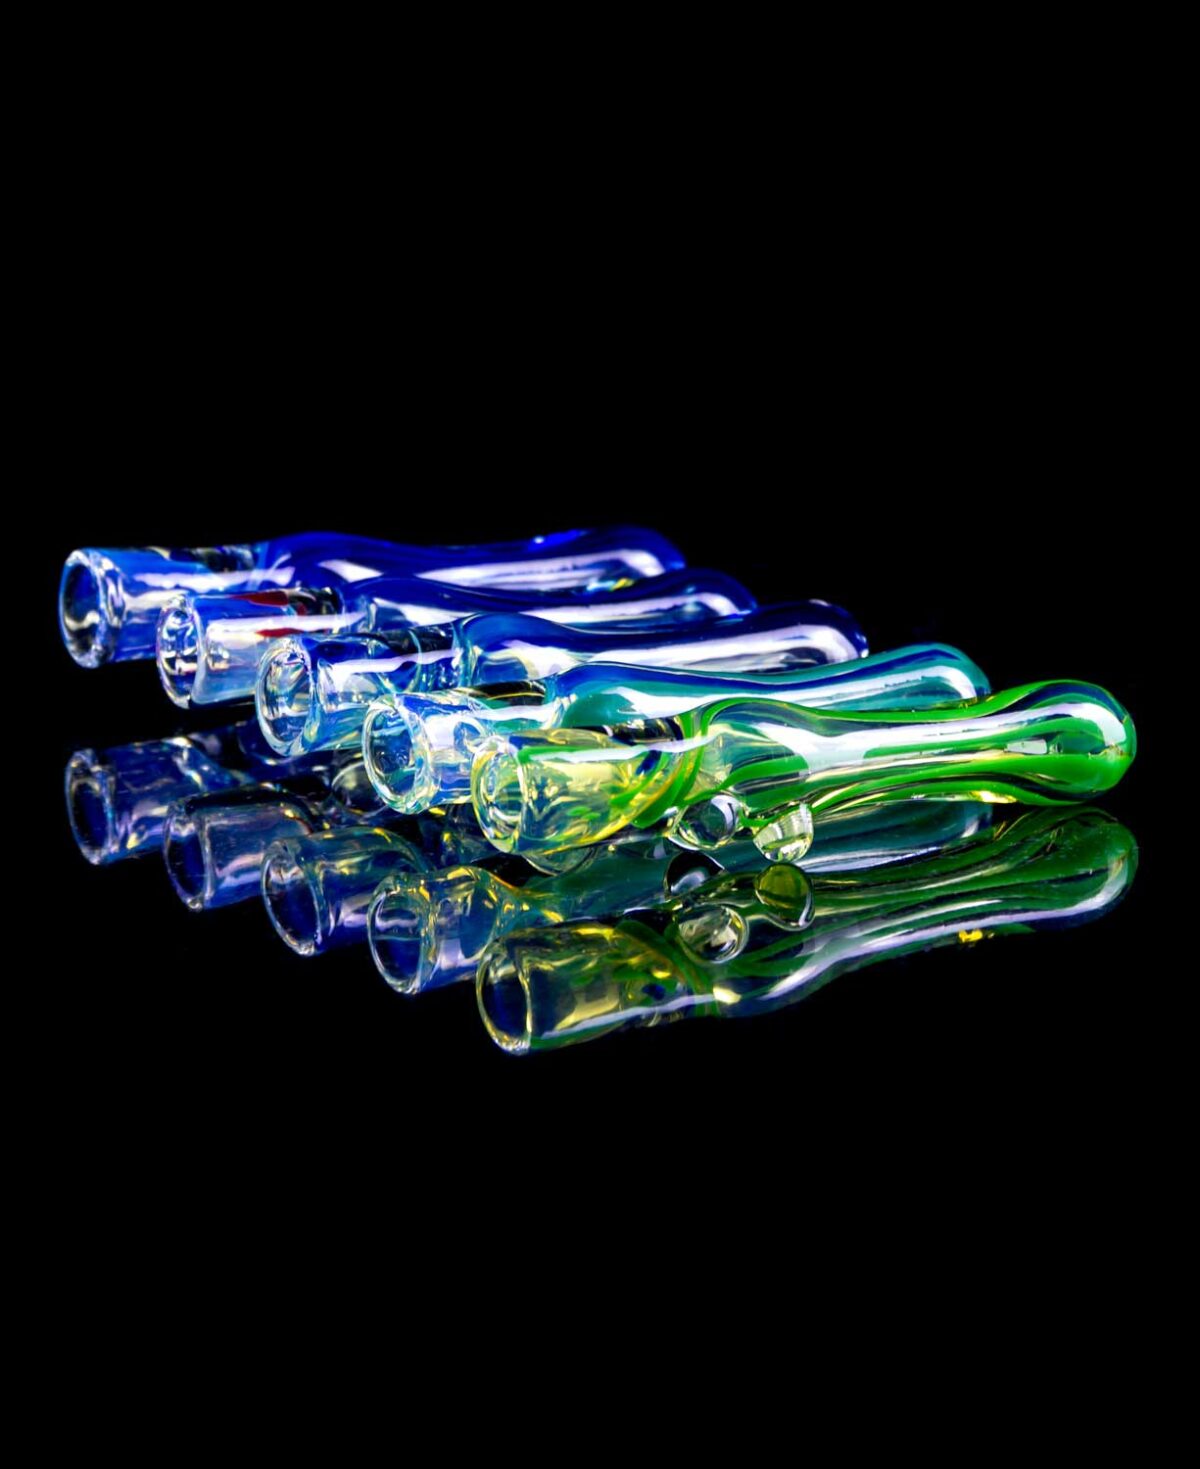 glass chillums with marble stands